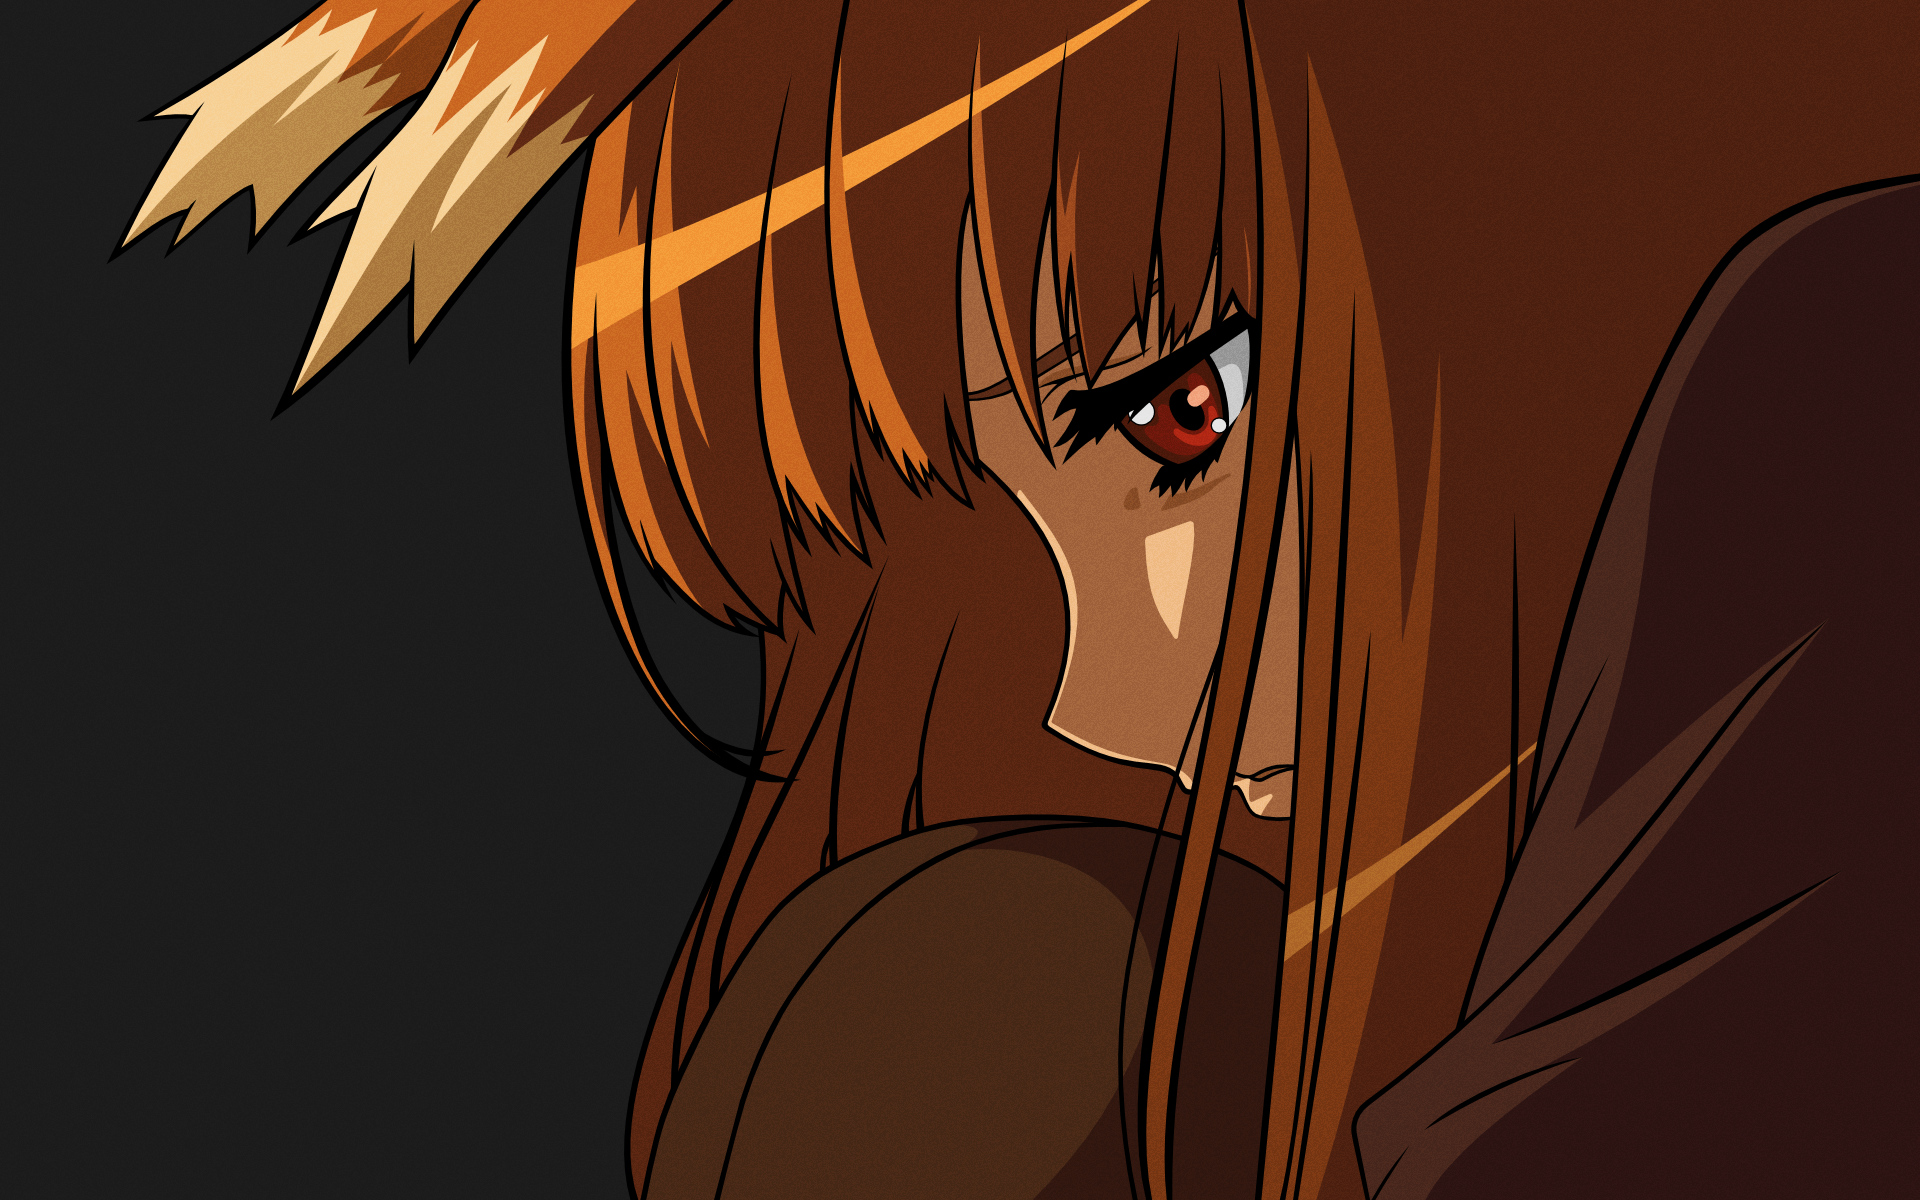 Anime character with brown hair and red eyes, wearing animal ears, appearing sad.